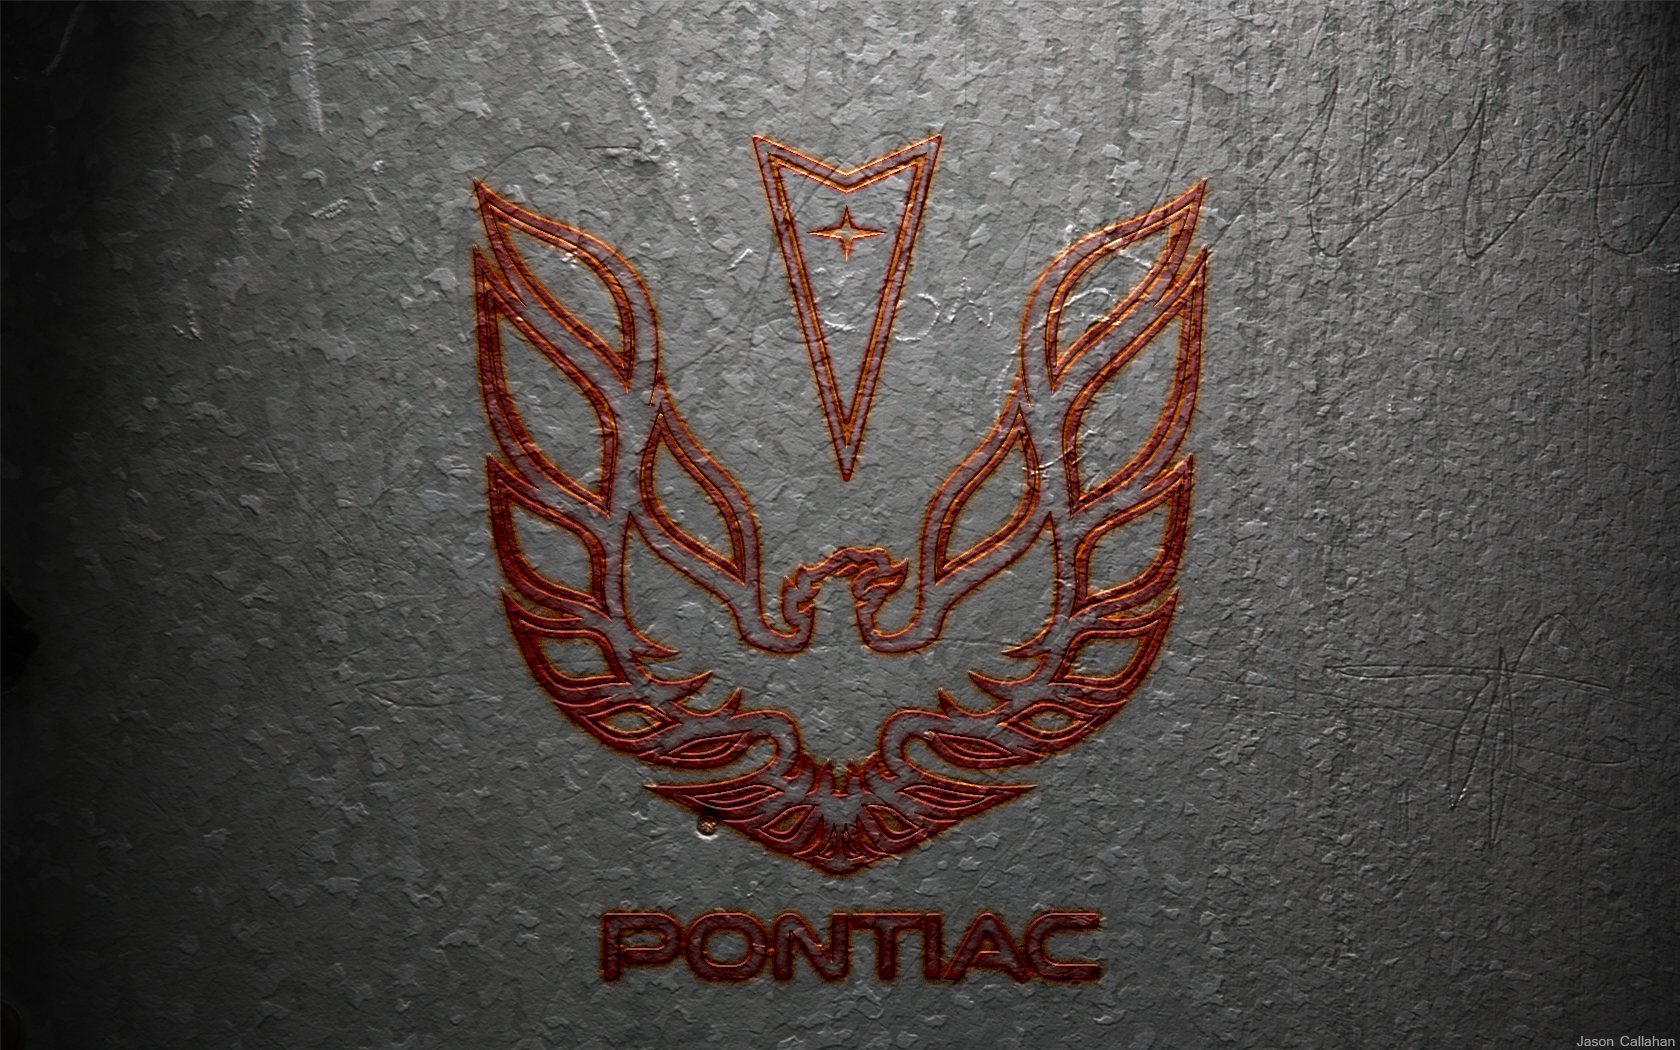 Free download Gallery For gt Pontiac Firebird Logo Tattoo [1680x1050] for your Desktop, Mobile & Tablet. Explore Firebird Wallpaper. Pontiac Firebird Wallpaper, 1968 Firebird Wallpaper, Gibson Firebird Wallpaper